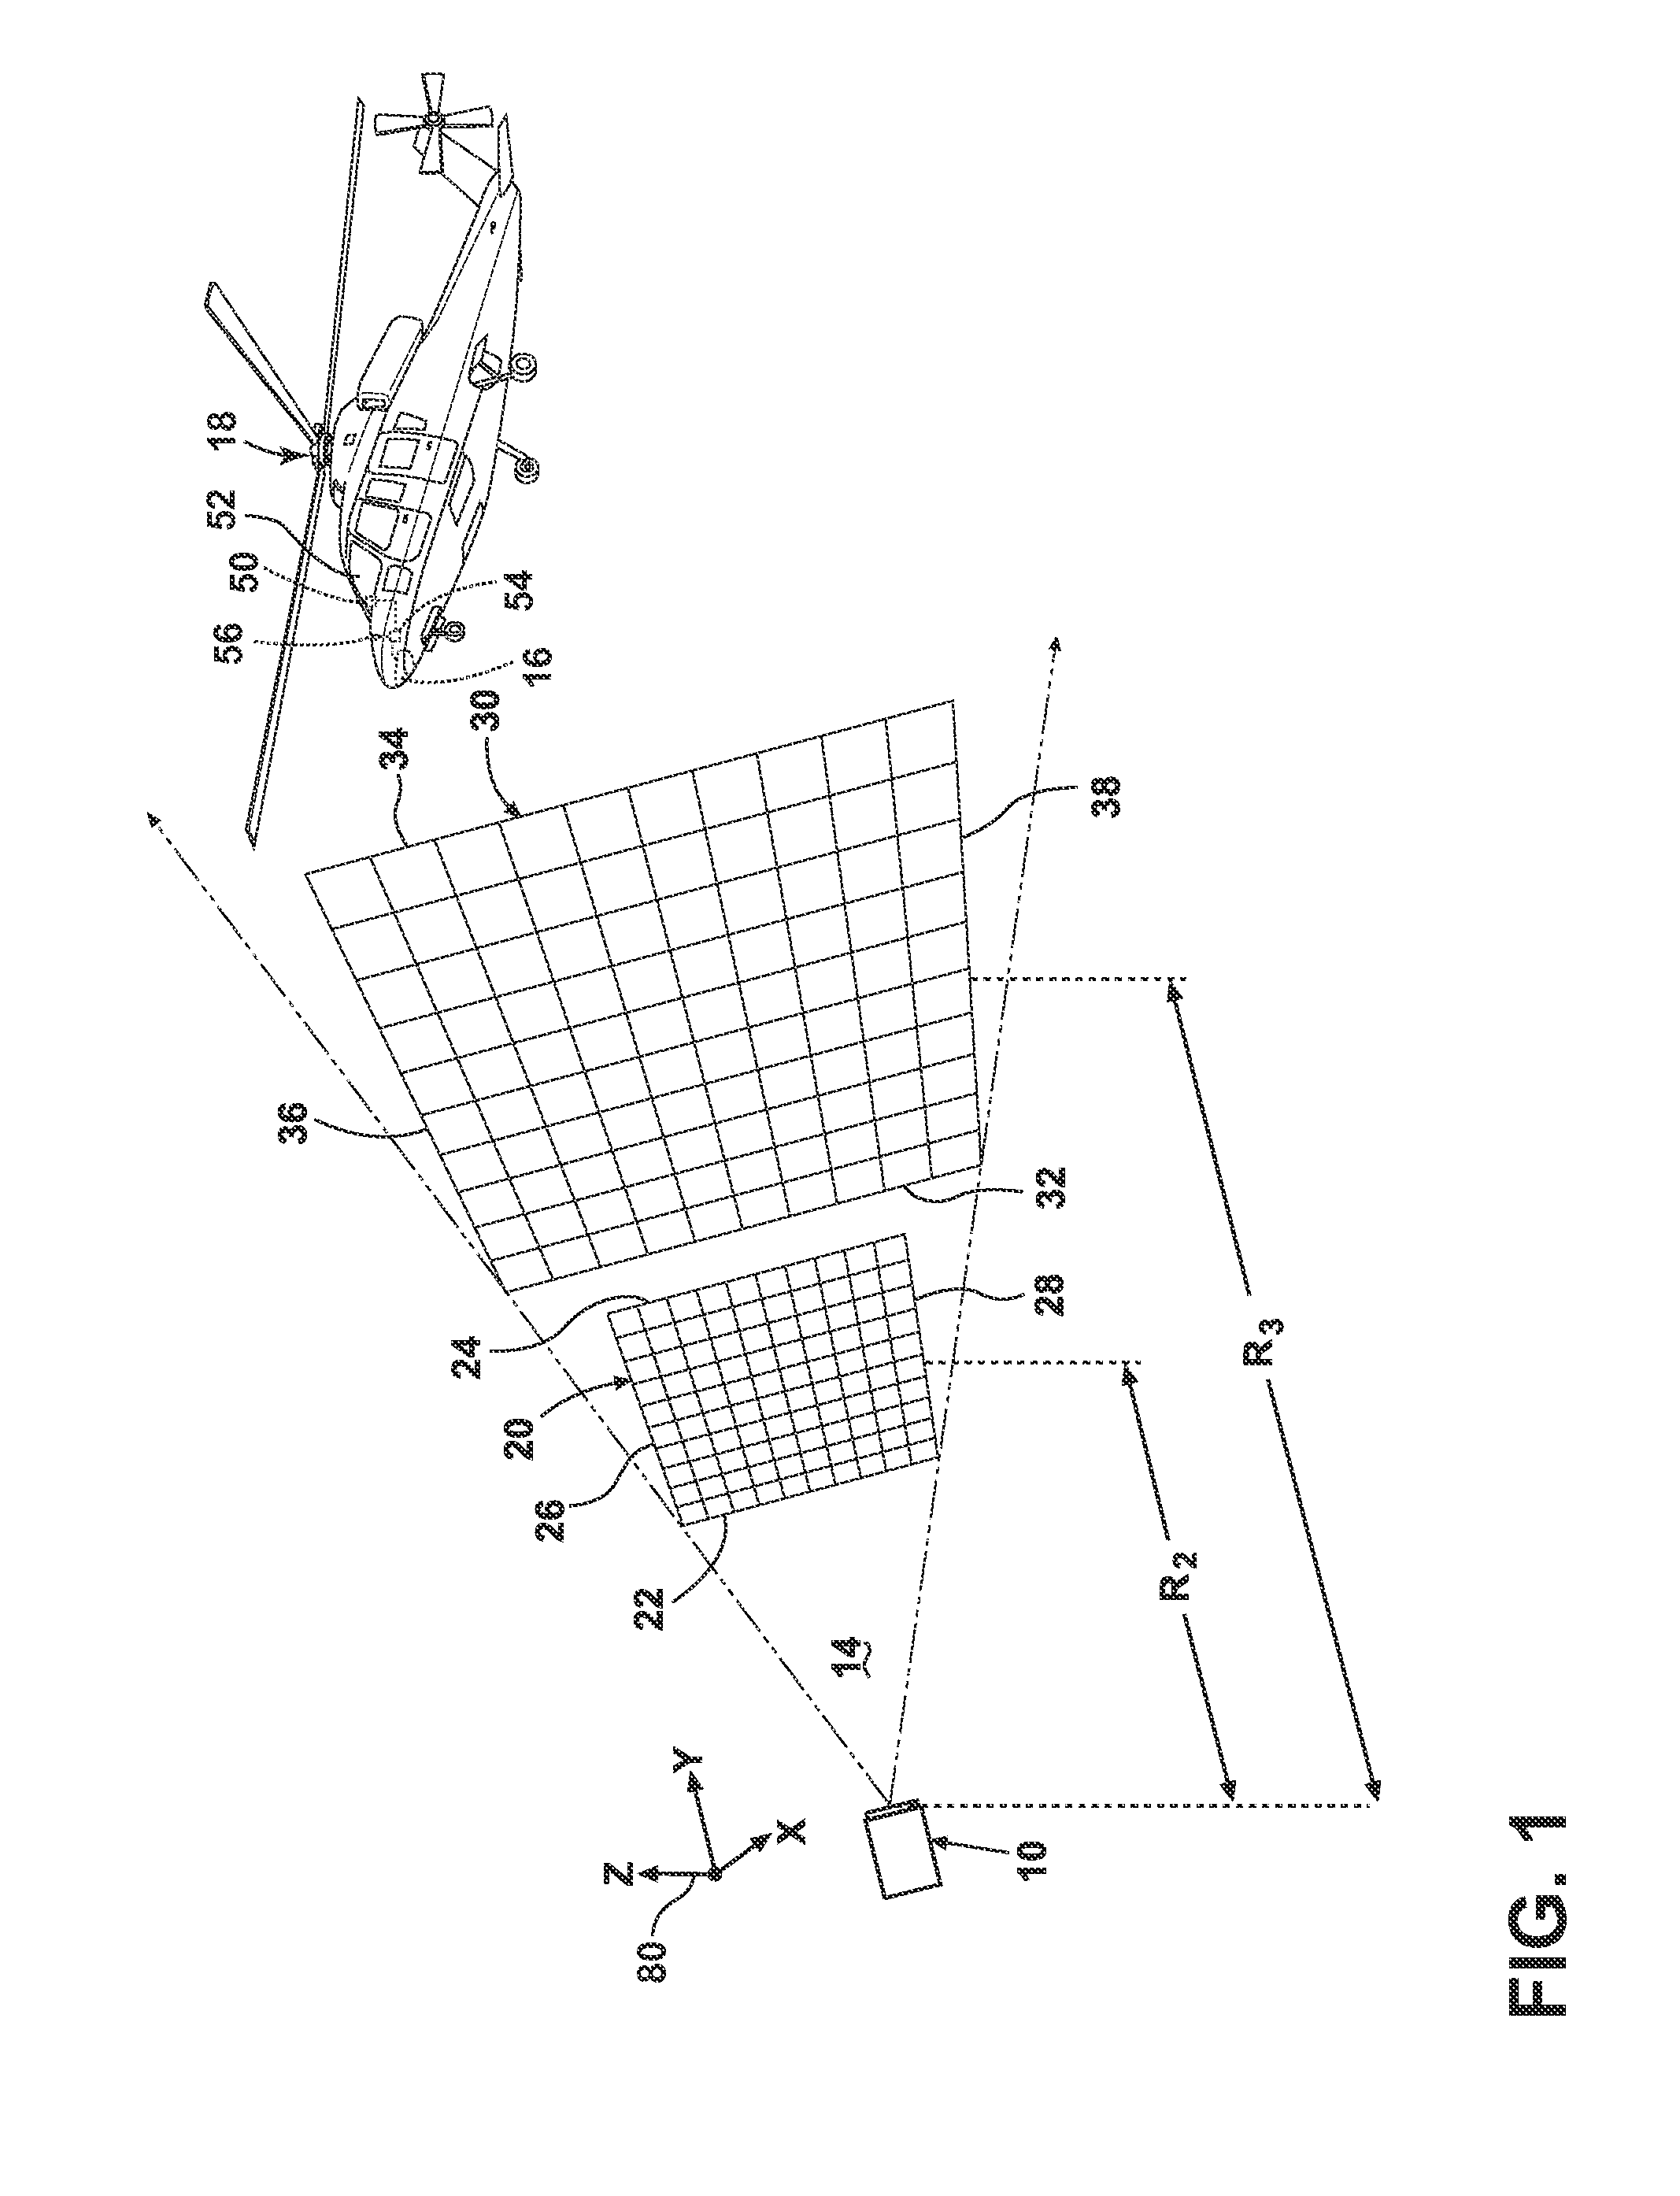 System and methods for providing situational awareness information for a relative navigation system